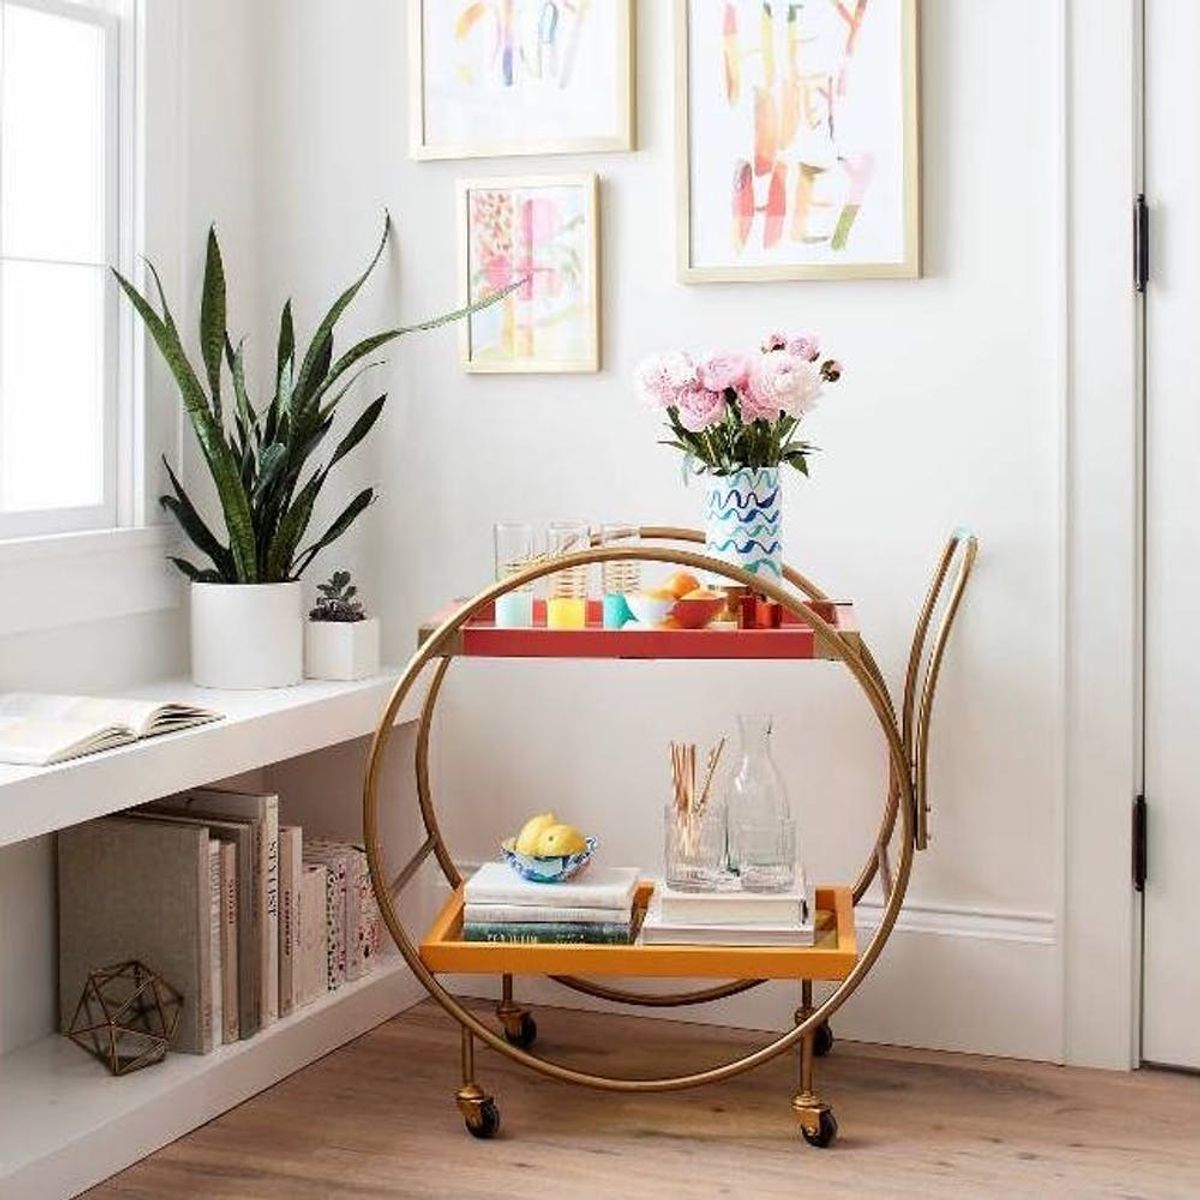 16 Bar Carts We Love from Our Favorite Bloggers